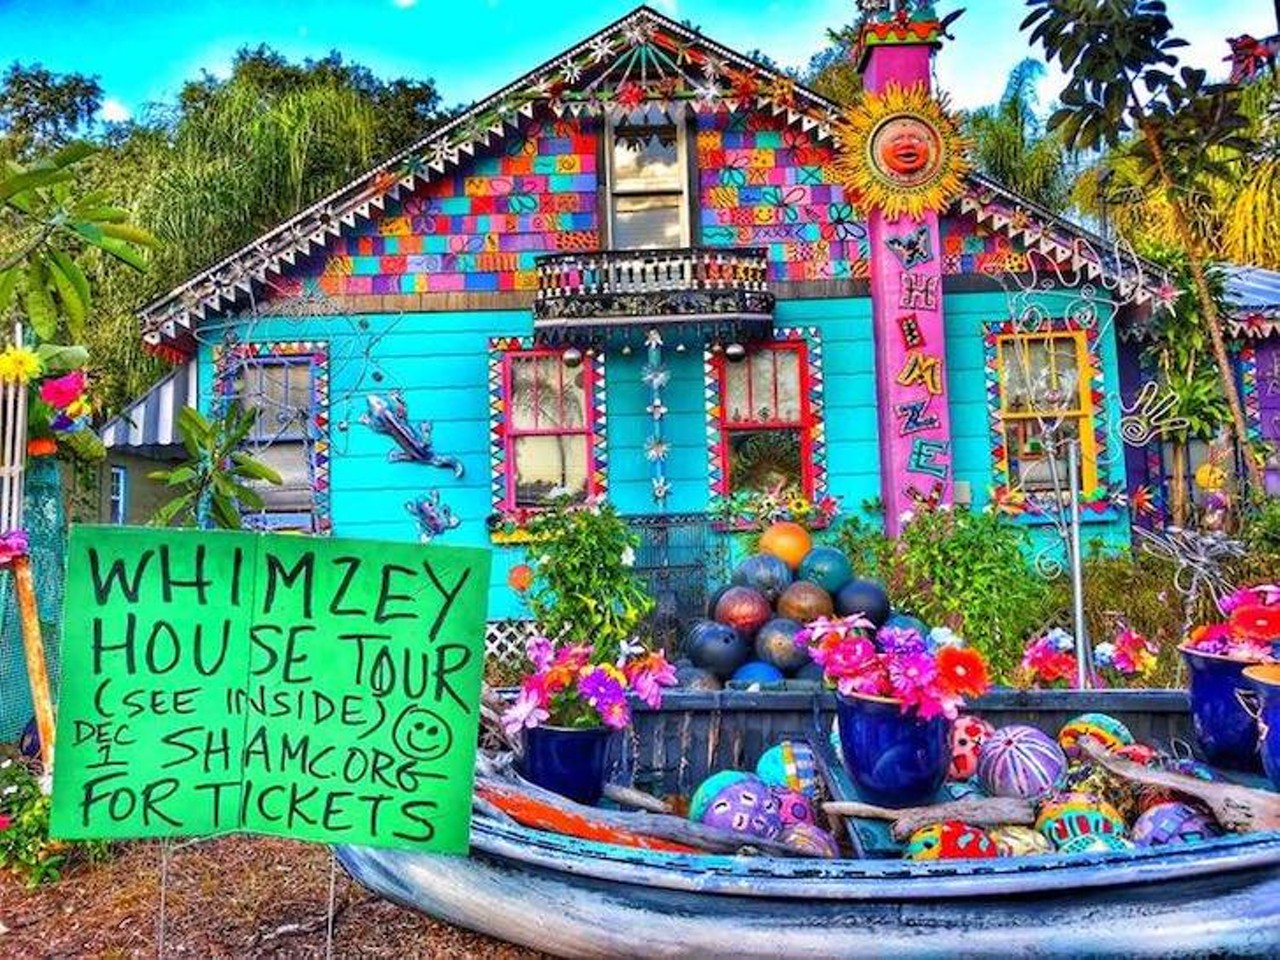 Whimzeyland
1206 N. Third St., Safety Harbor
Also known as &#147;the Bowling Ball House,&#148; this house has been a 20-year project for artists Todd Ramquist and Kiaralinda that started when they went to a local flea market and saw a sign offering 10 free bowling balls per person. Now, the house has over 300.
Photo via Whimzeyland/Facebook